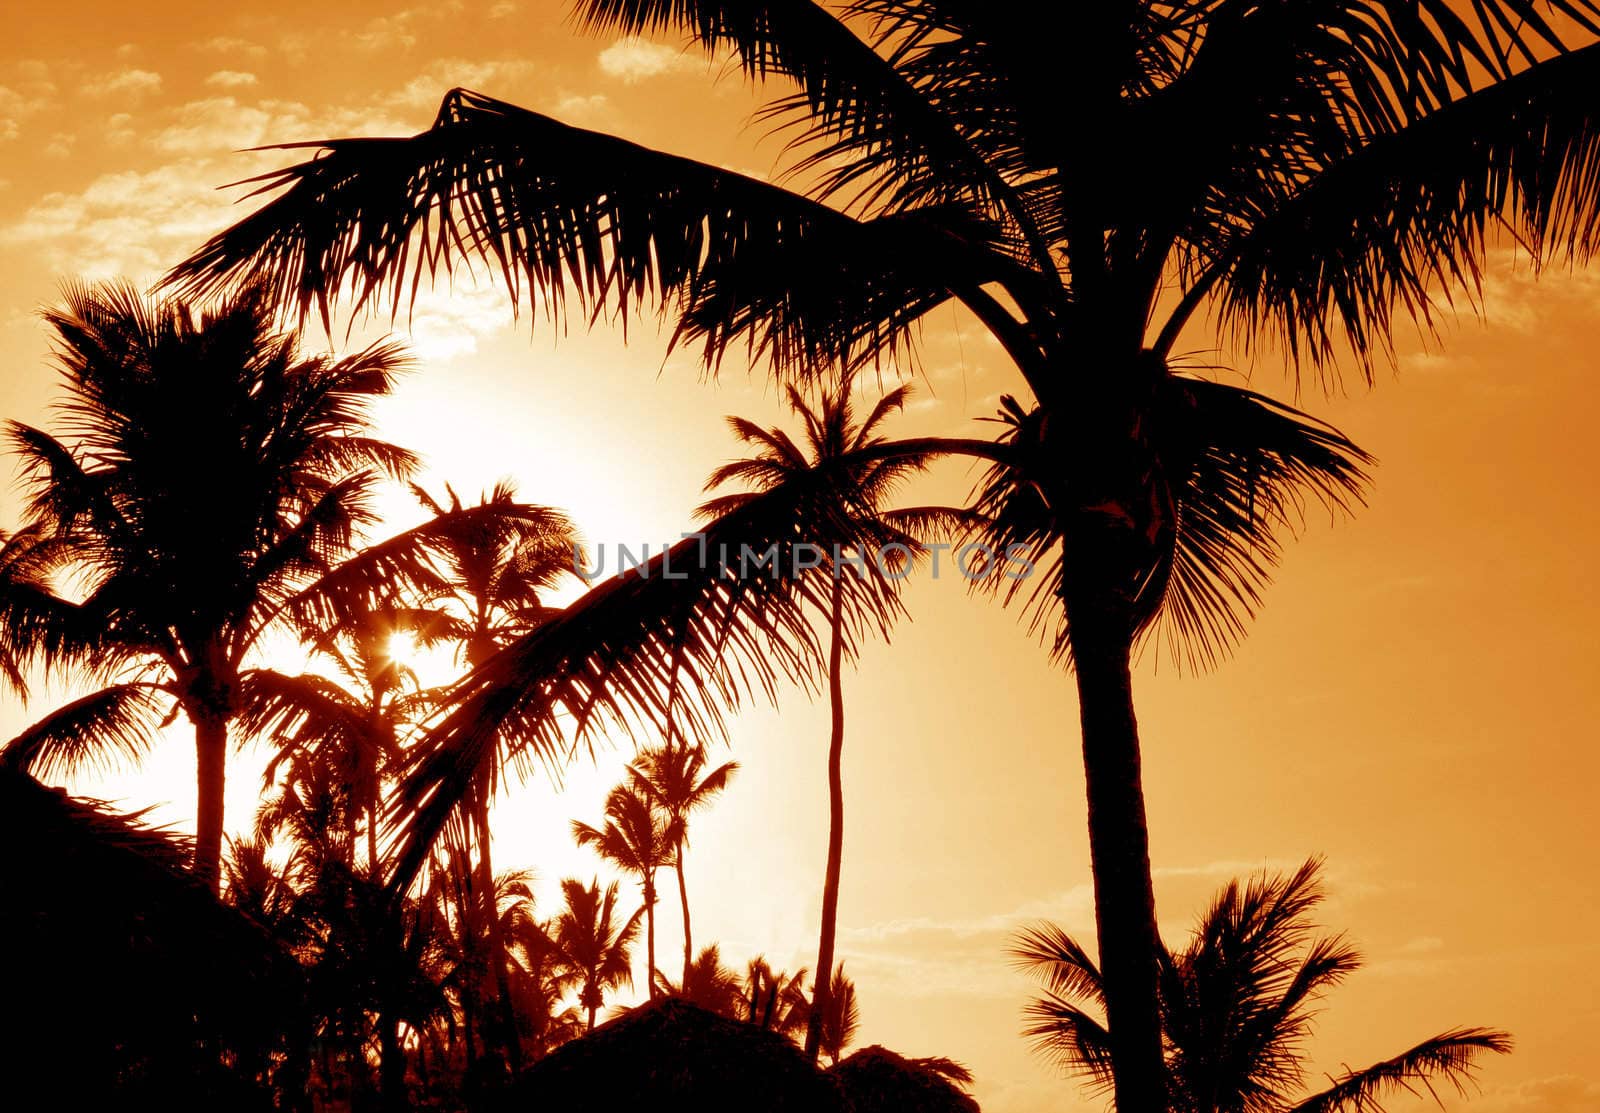 Tropical Palm Sunset Silhouettes
 by ca2hill